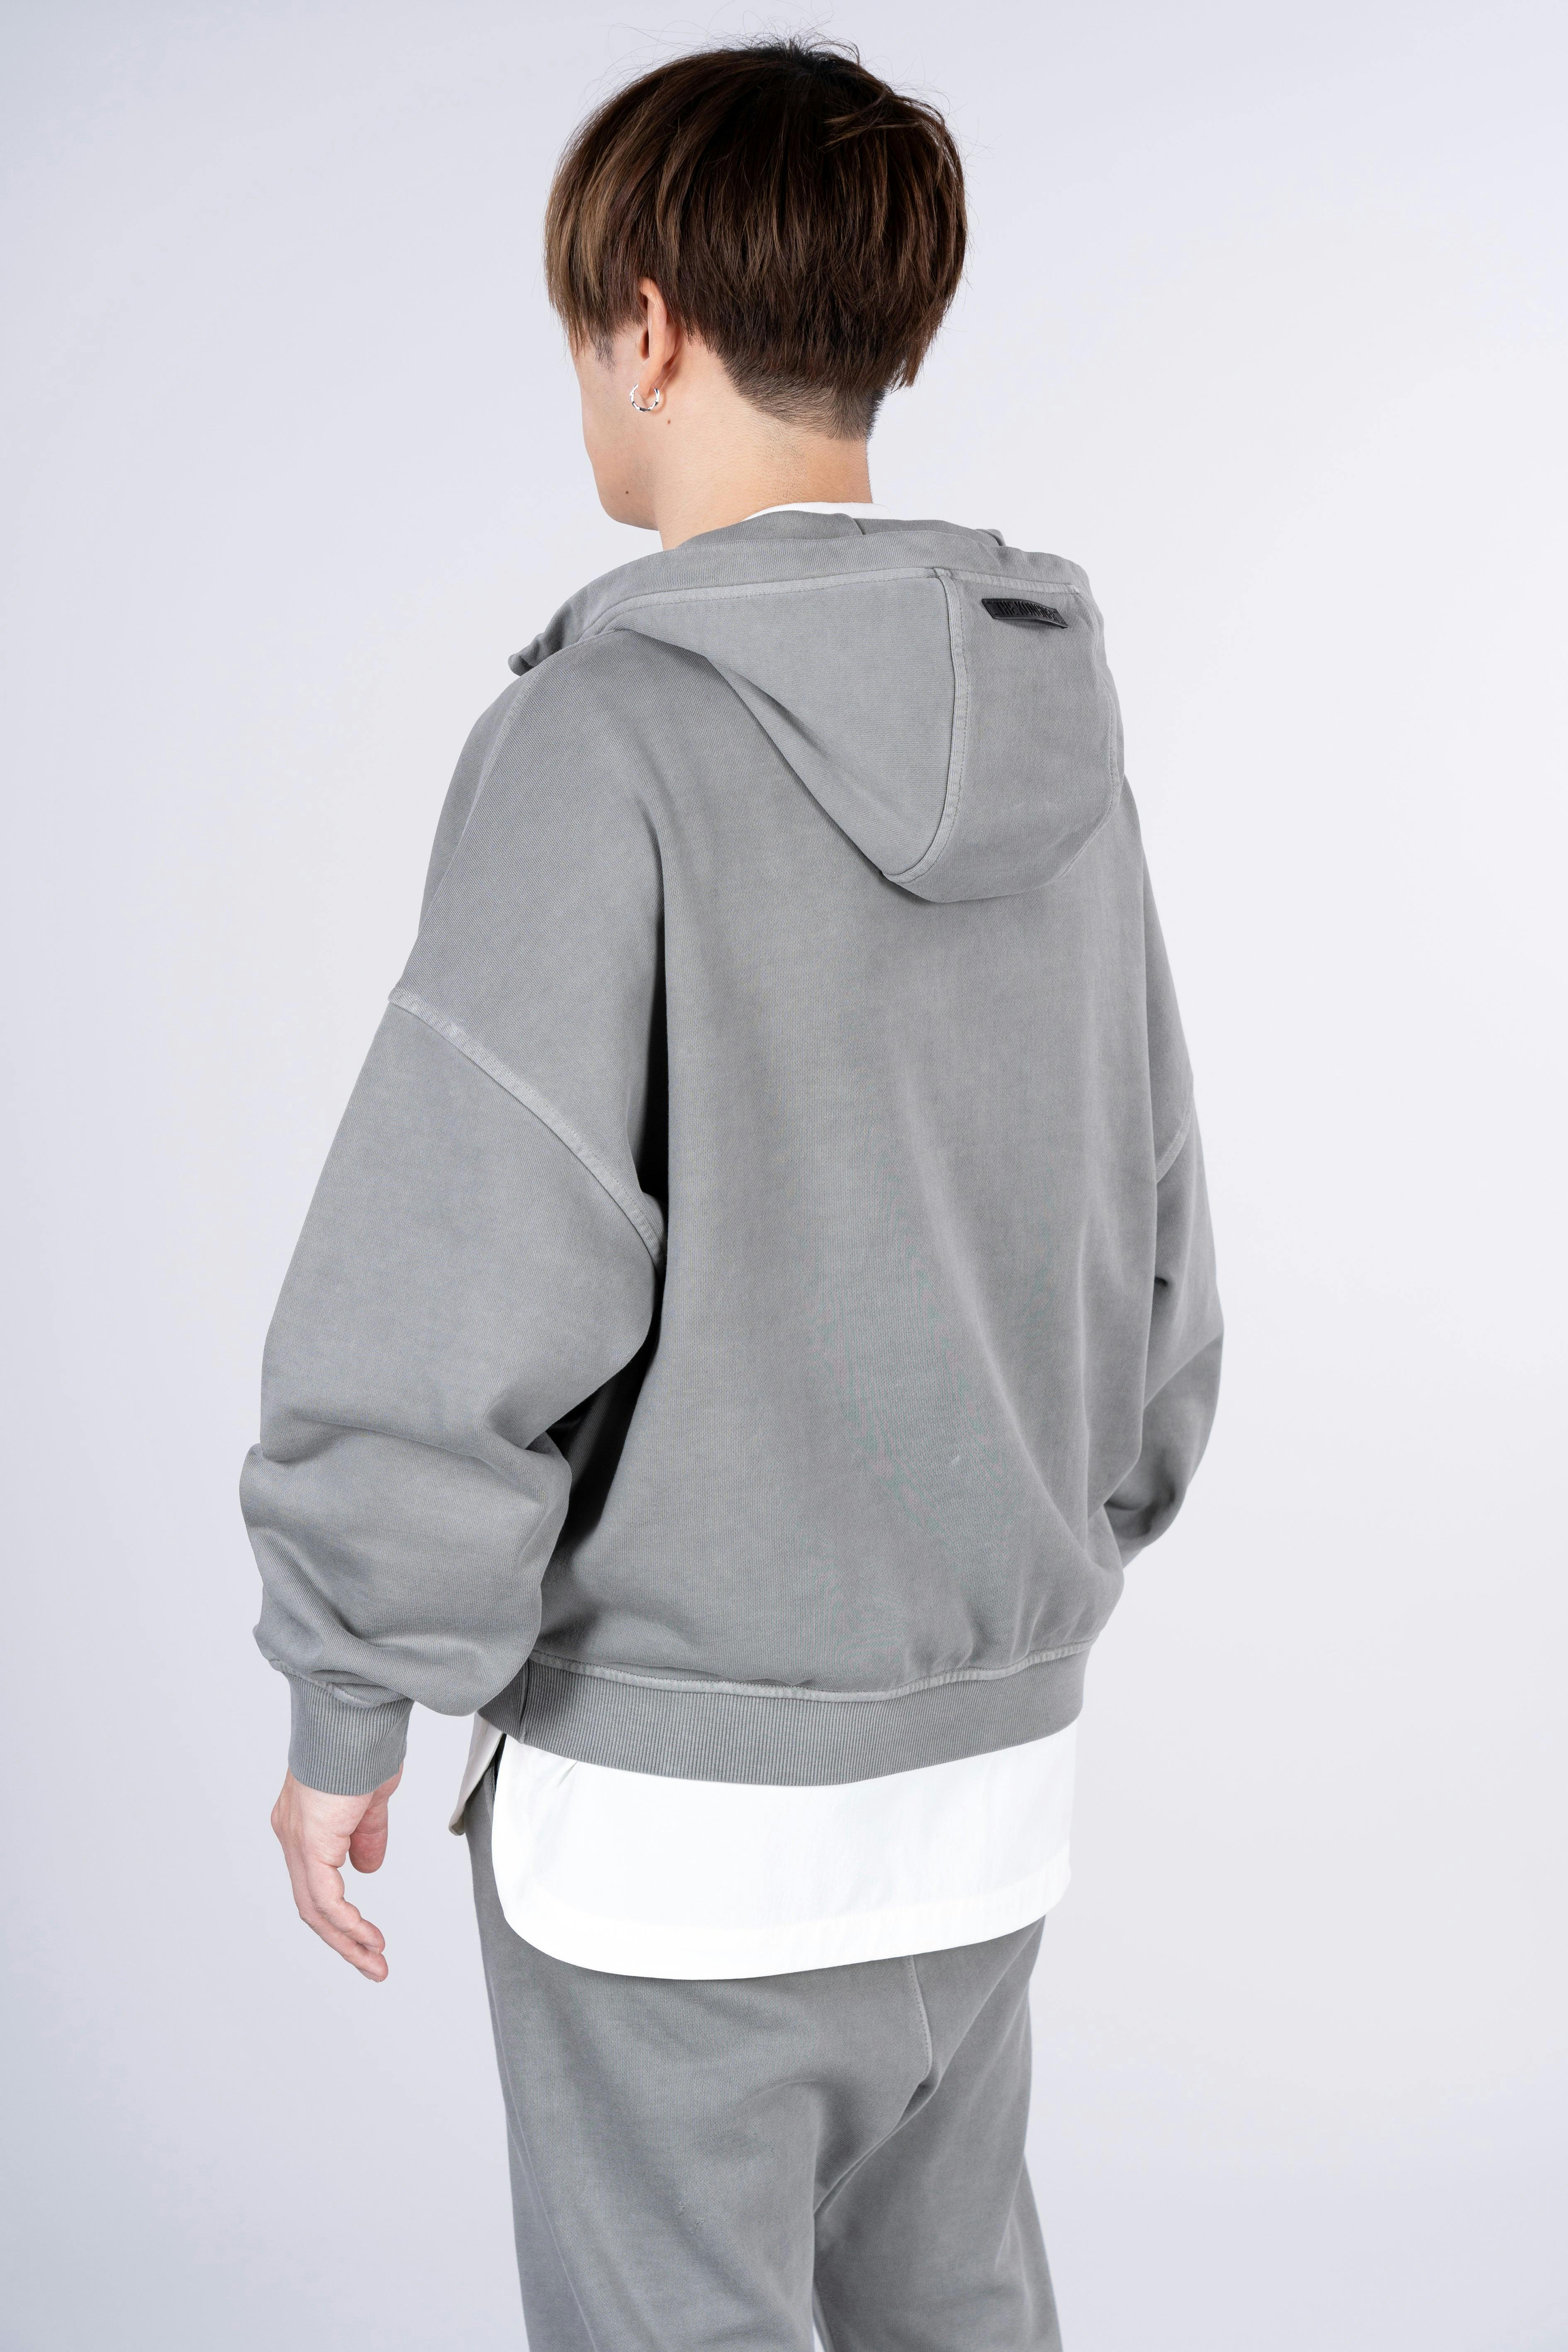 ˝CHAOS˝ Washed Zip-Up - Washed Grey